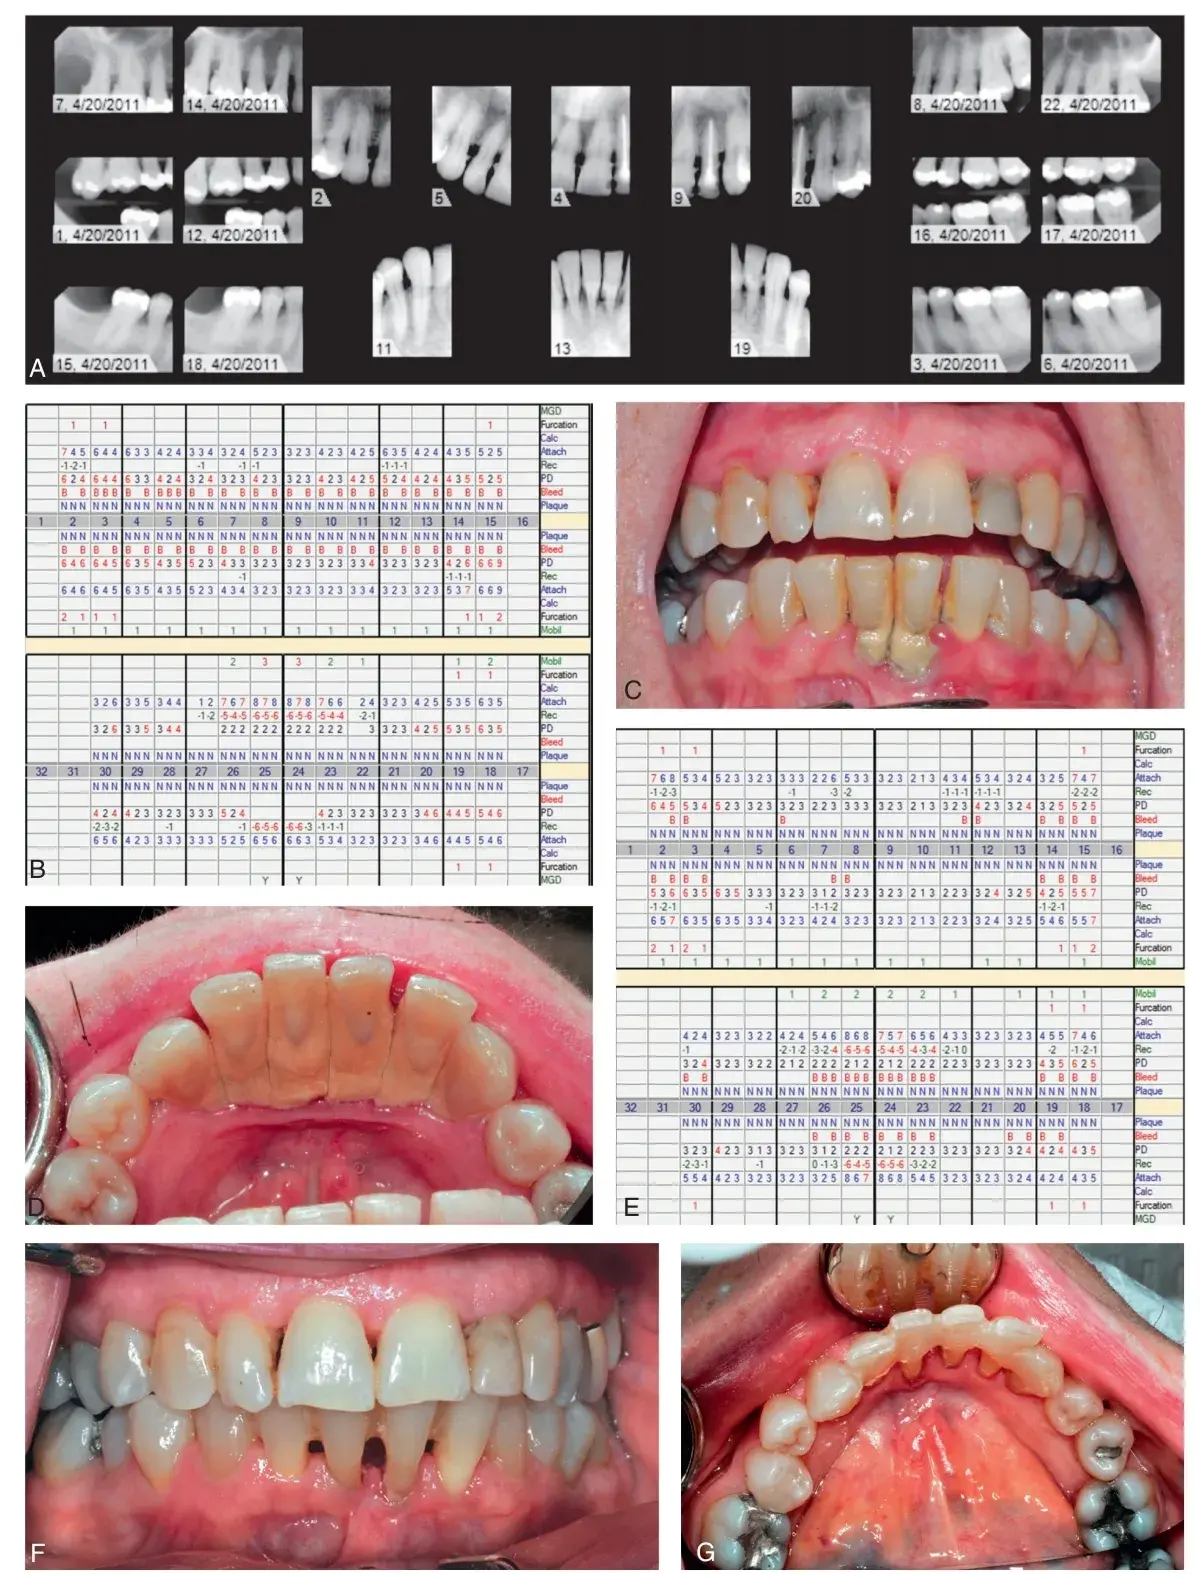 Periodontal infection, shaping and root planning, gingival recession